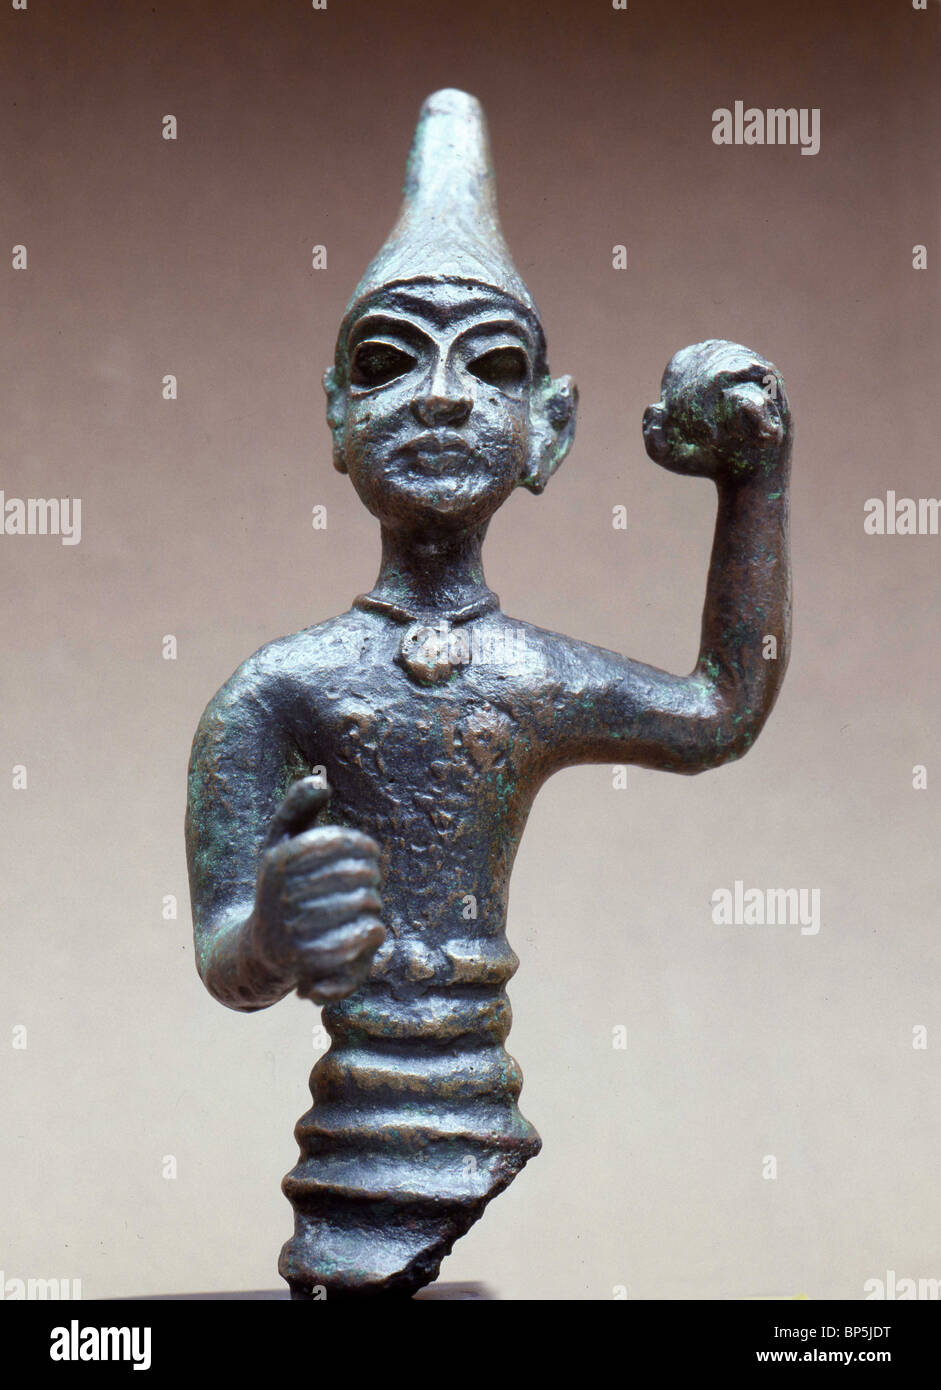 3787. BRONZE FIGURINE OF OF MALE DEITY, PROBABLY THE CNAANITE GOD OF WAR BAAL, DATING CA. 1400 - 1300 B.C. Stock Photo